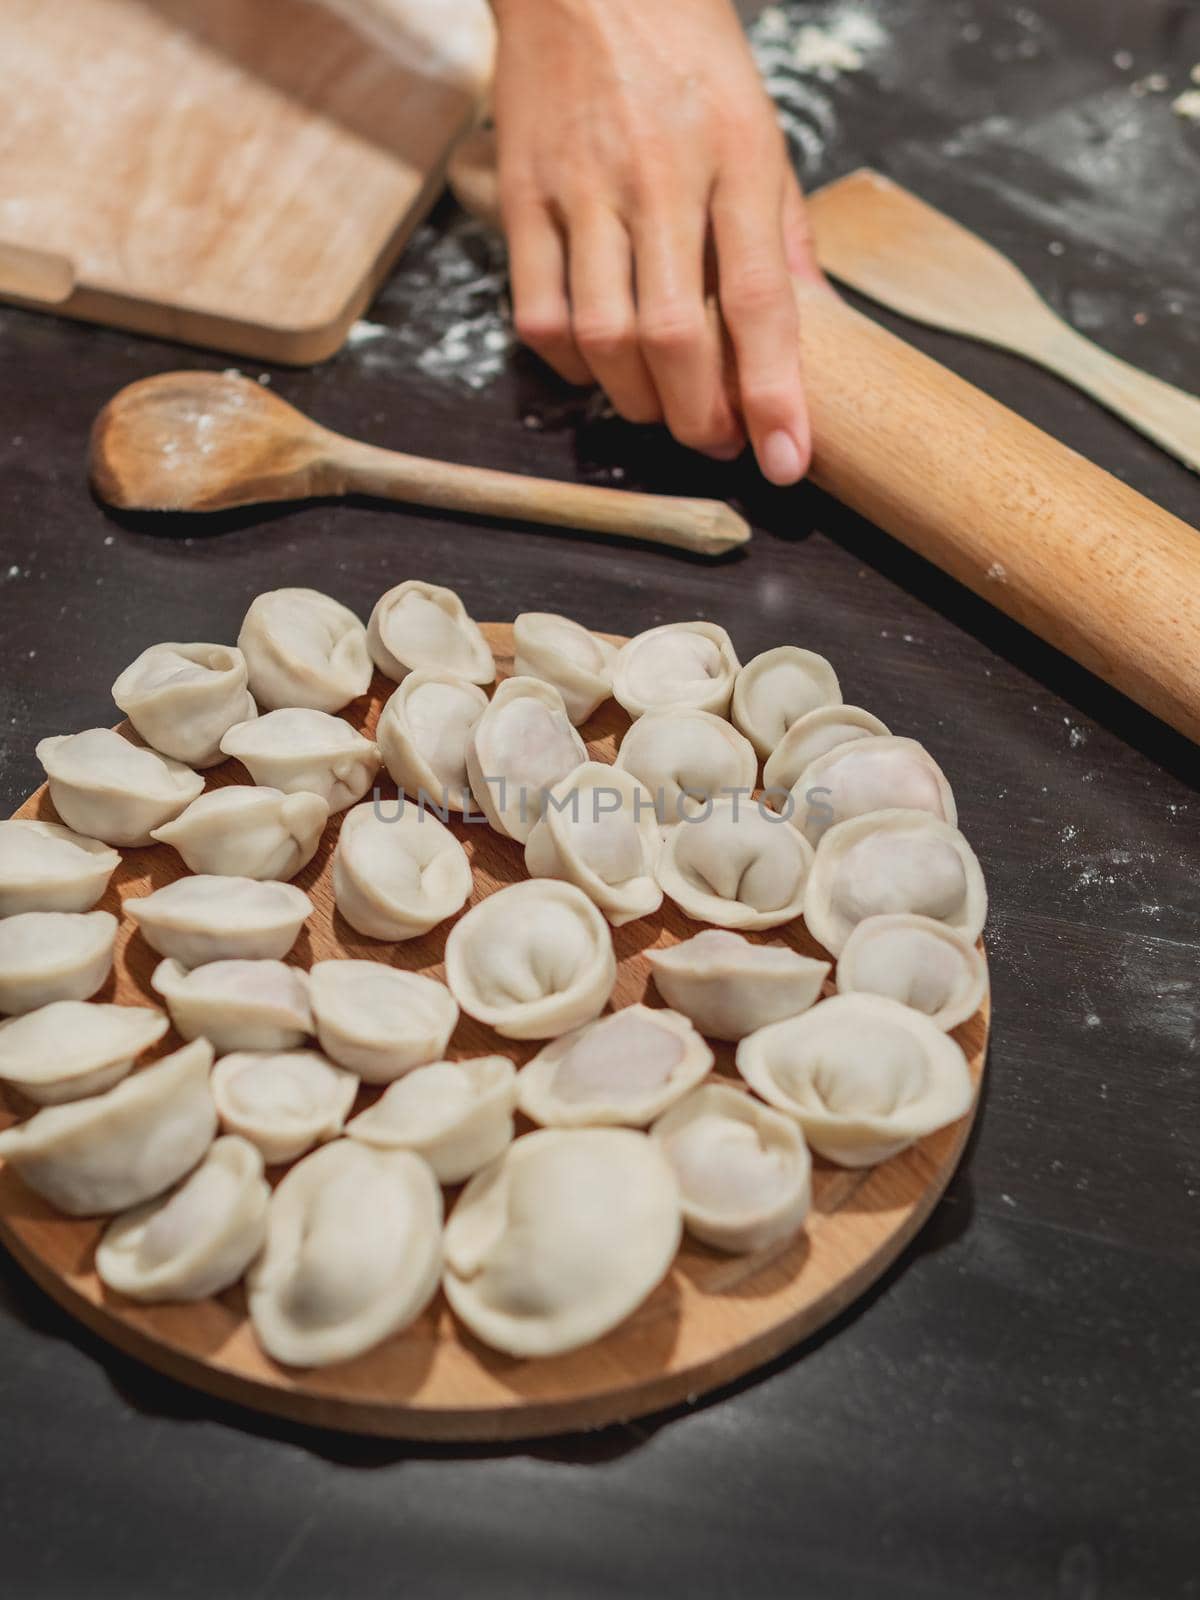 Woman makes pelmeni or dumplings - traditional dish of Russian cuisine made of dough and meat. Black kitchen table with flour and wooden utensils. by aksenovko